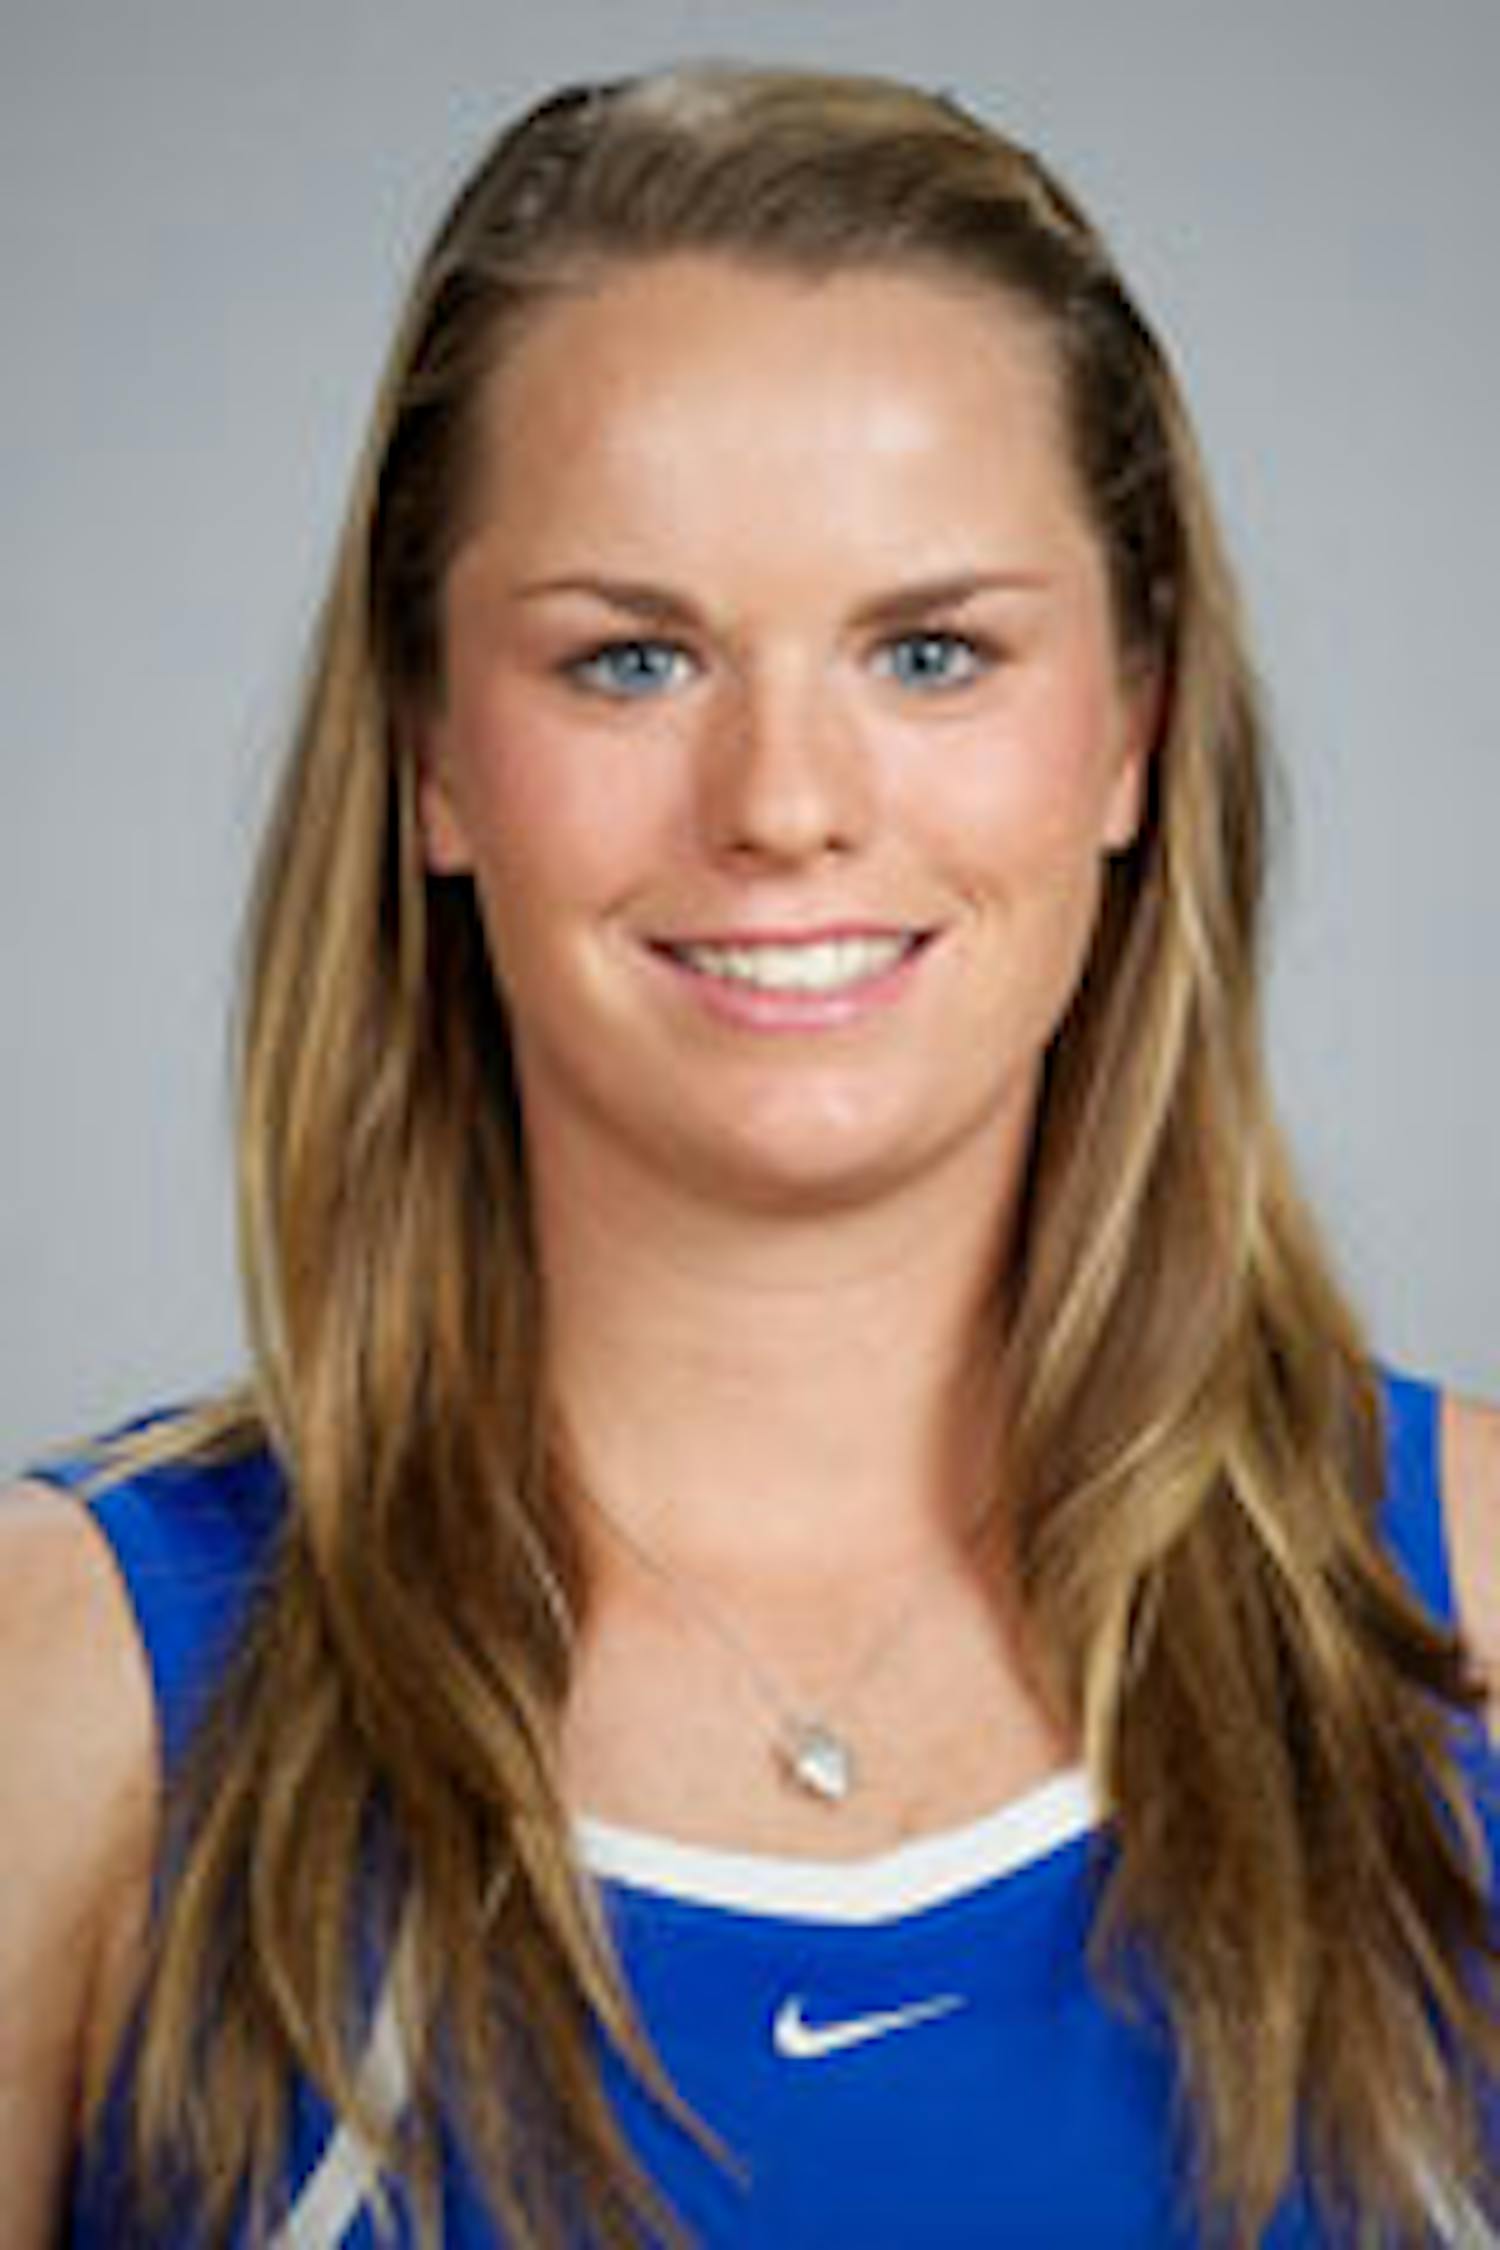 Freshman Belinda Woolcock (above) beat three competitors in the pre-qualifying rounds to earn herself a spot in qualifying play&nbsp;at the Riviera/Intercollegiate Tennis Association’s All-American tournament in California.